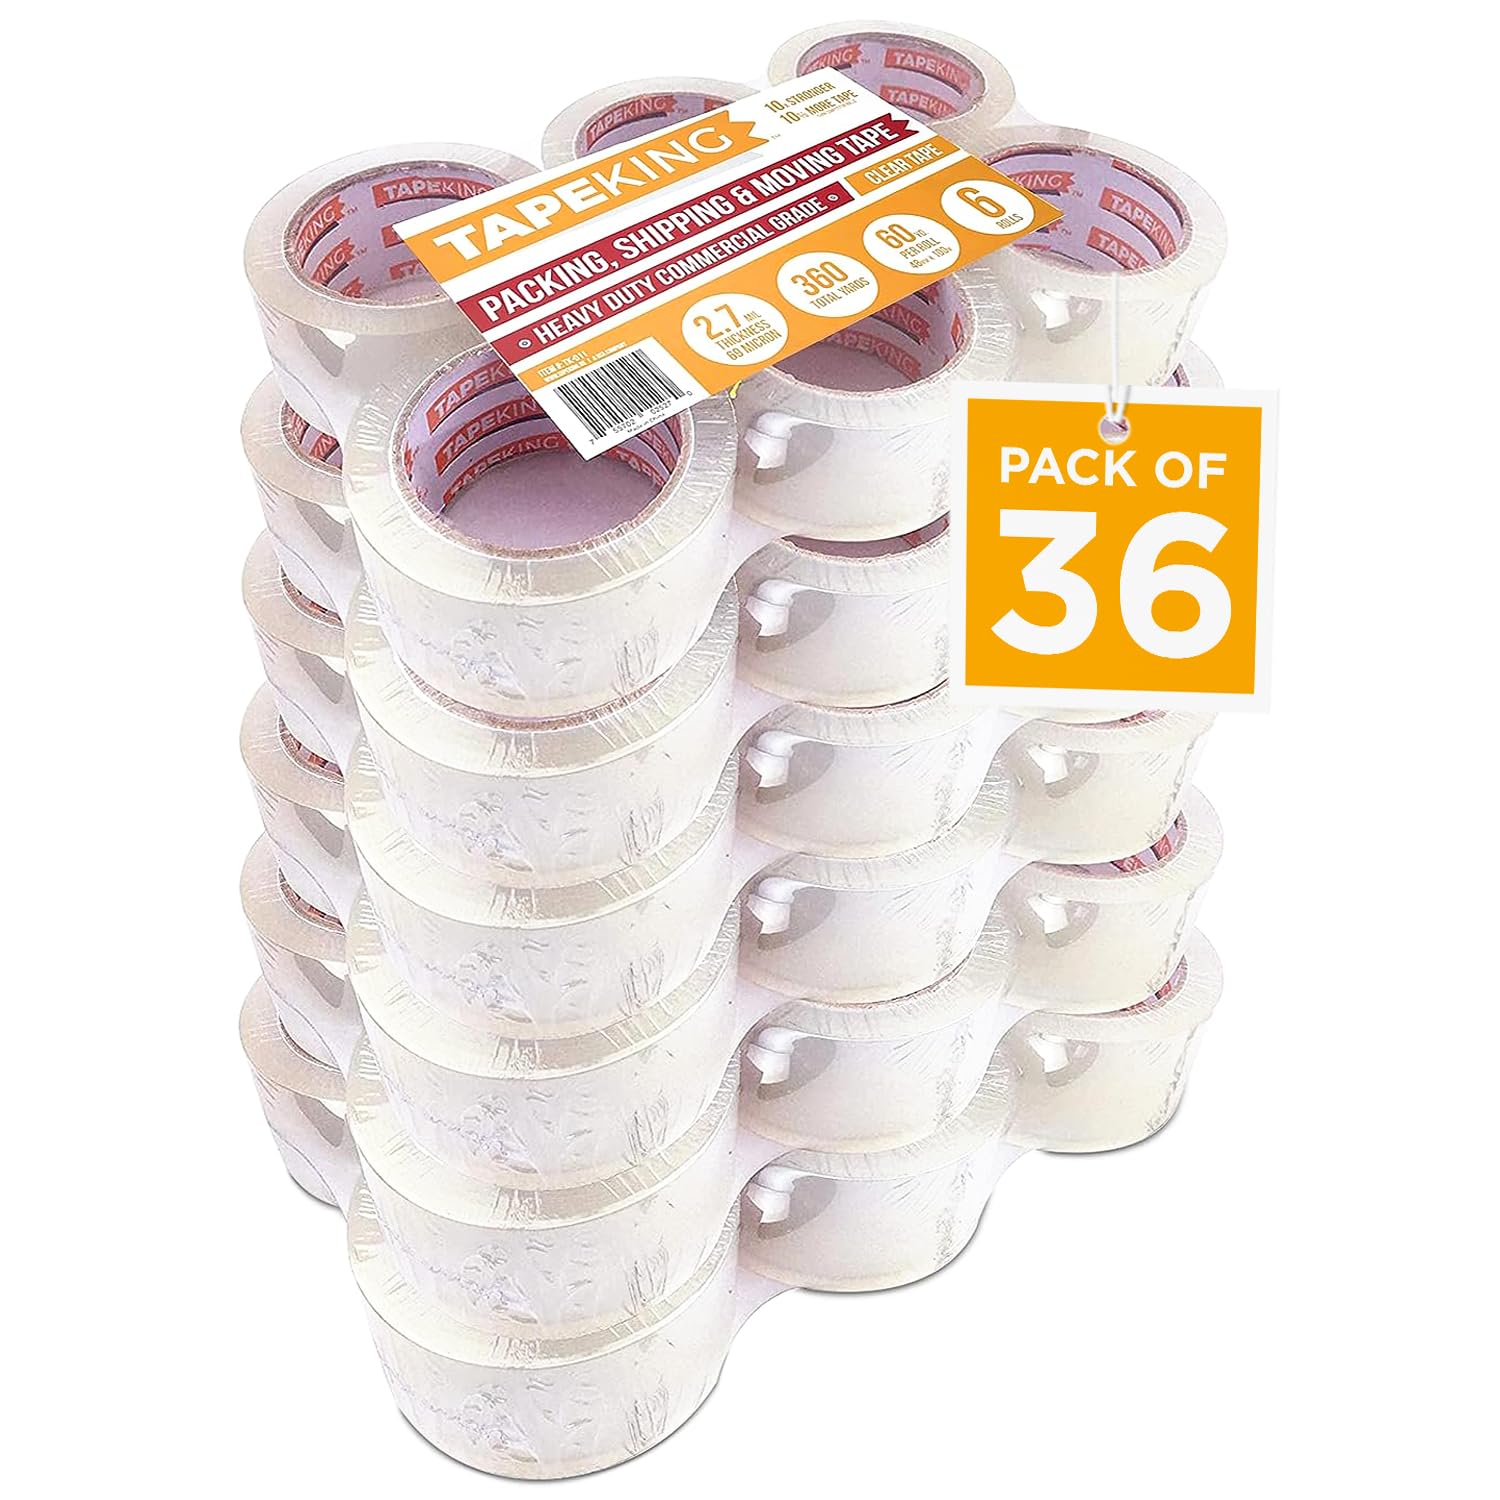 36 Rolls Of Tape King Clear Packing Tape - 60 Yards & 2.7mil $23.61